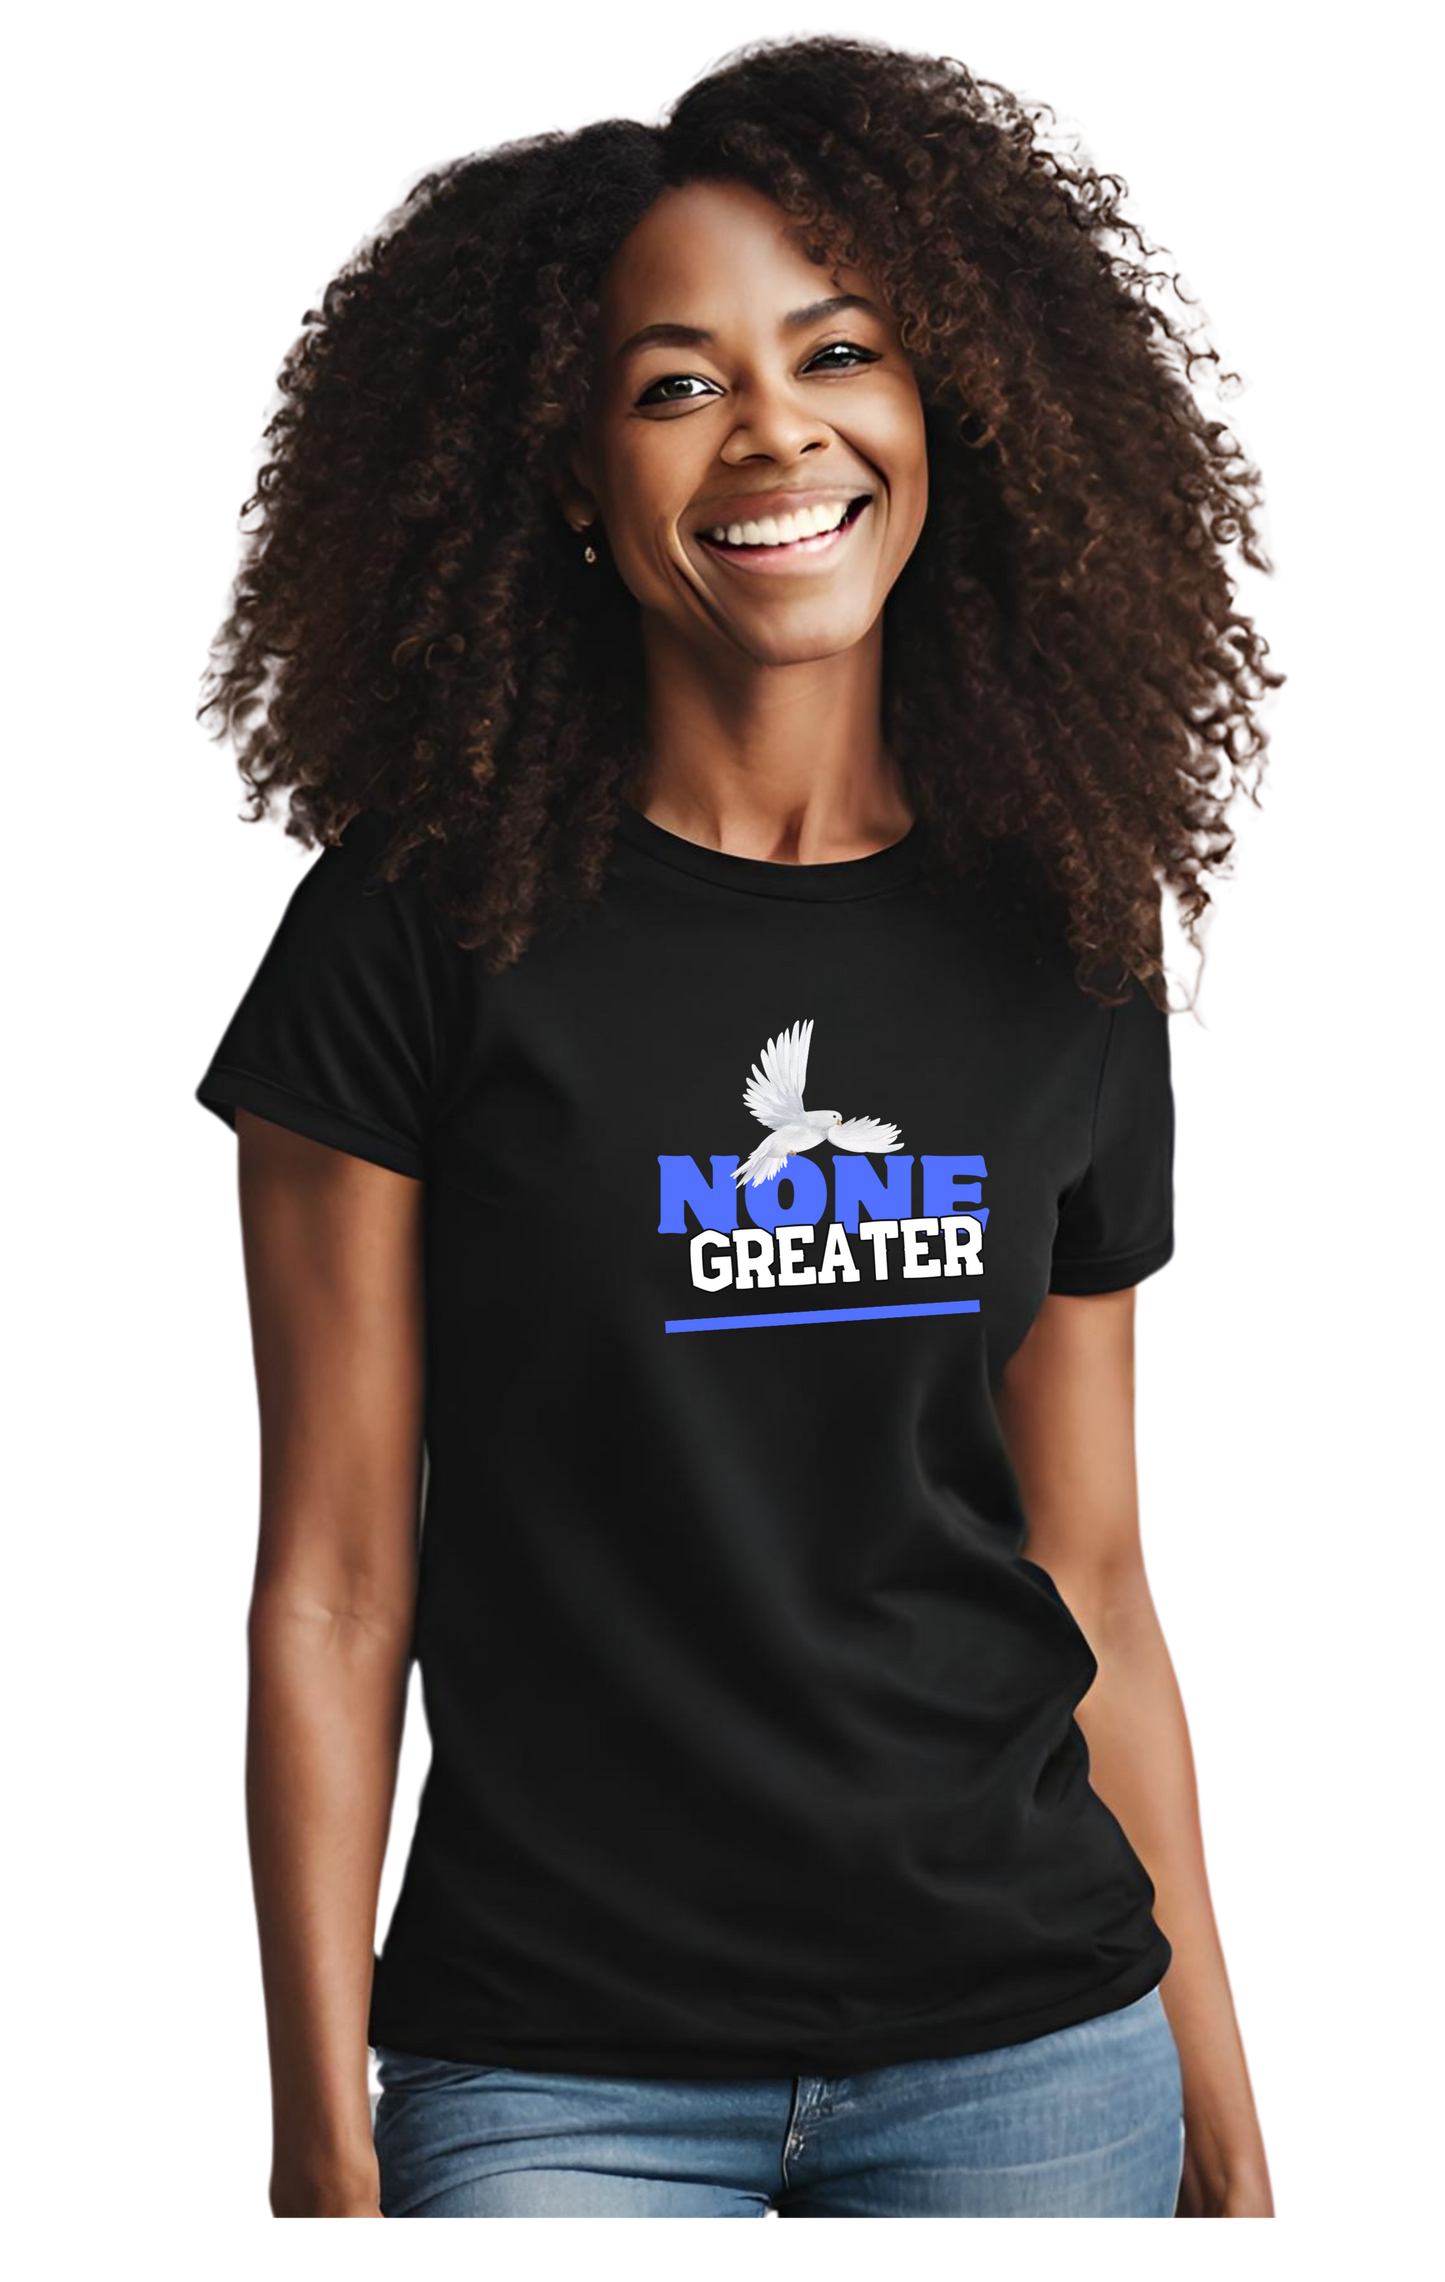 Black Unisex Heavy Cotton Tee w/White Dove, Royal Blue and White Letters saying "None Greater"